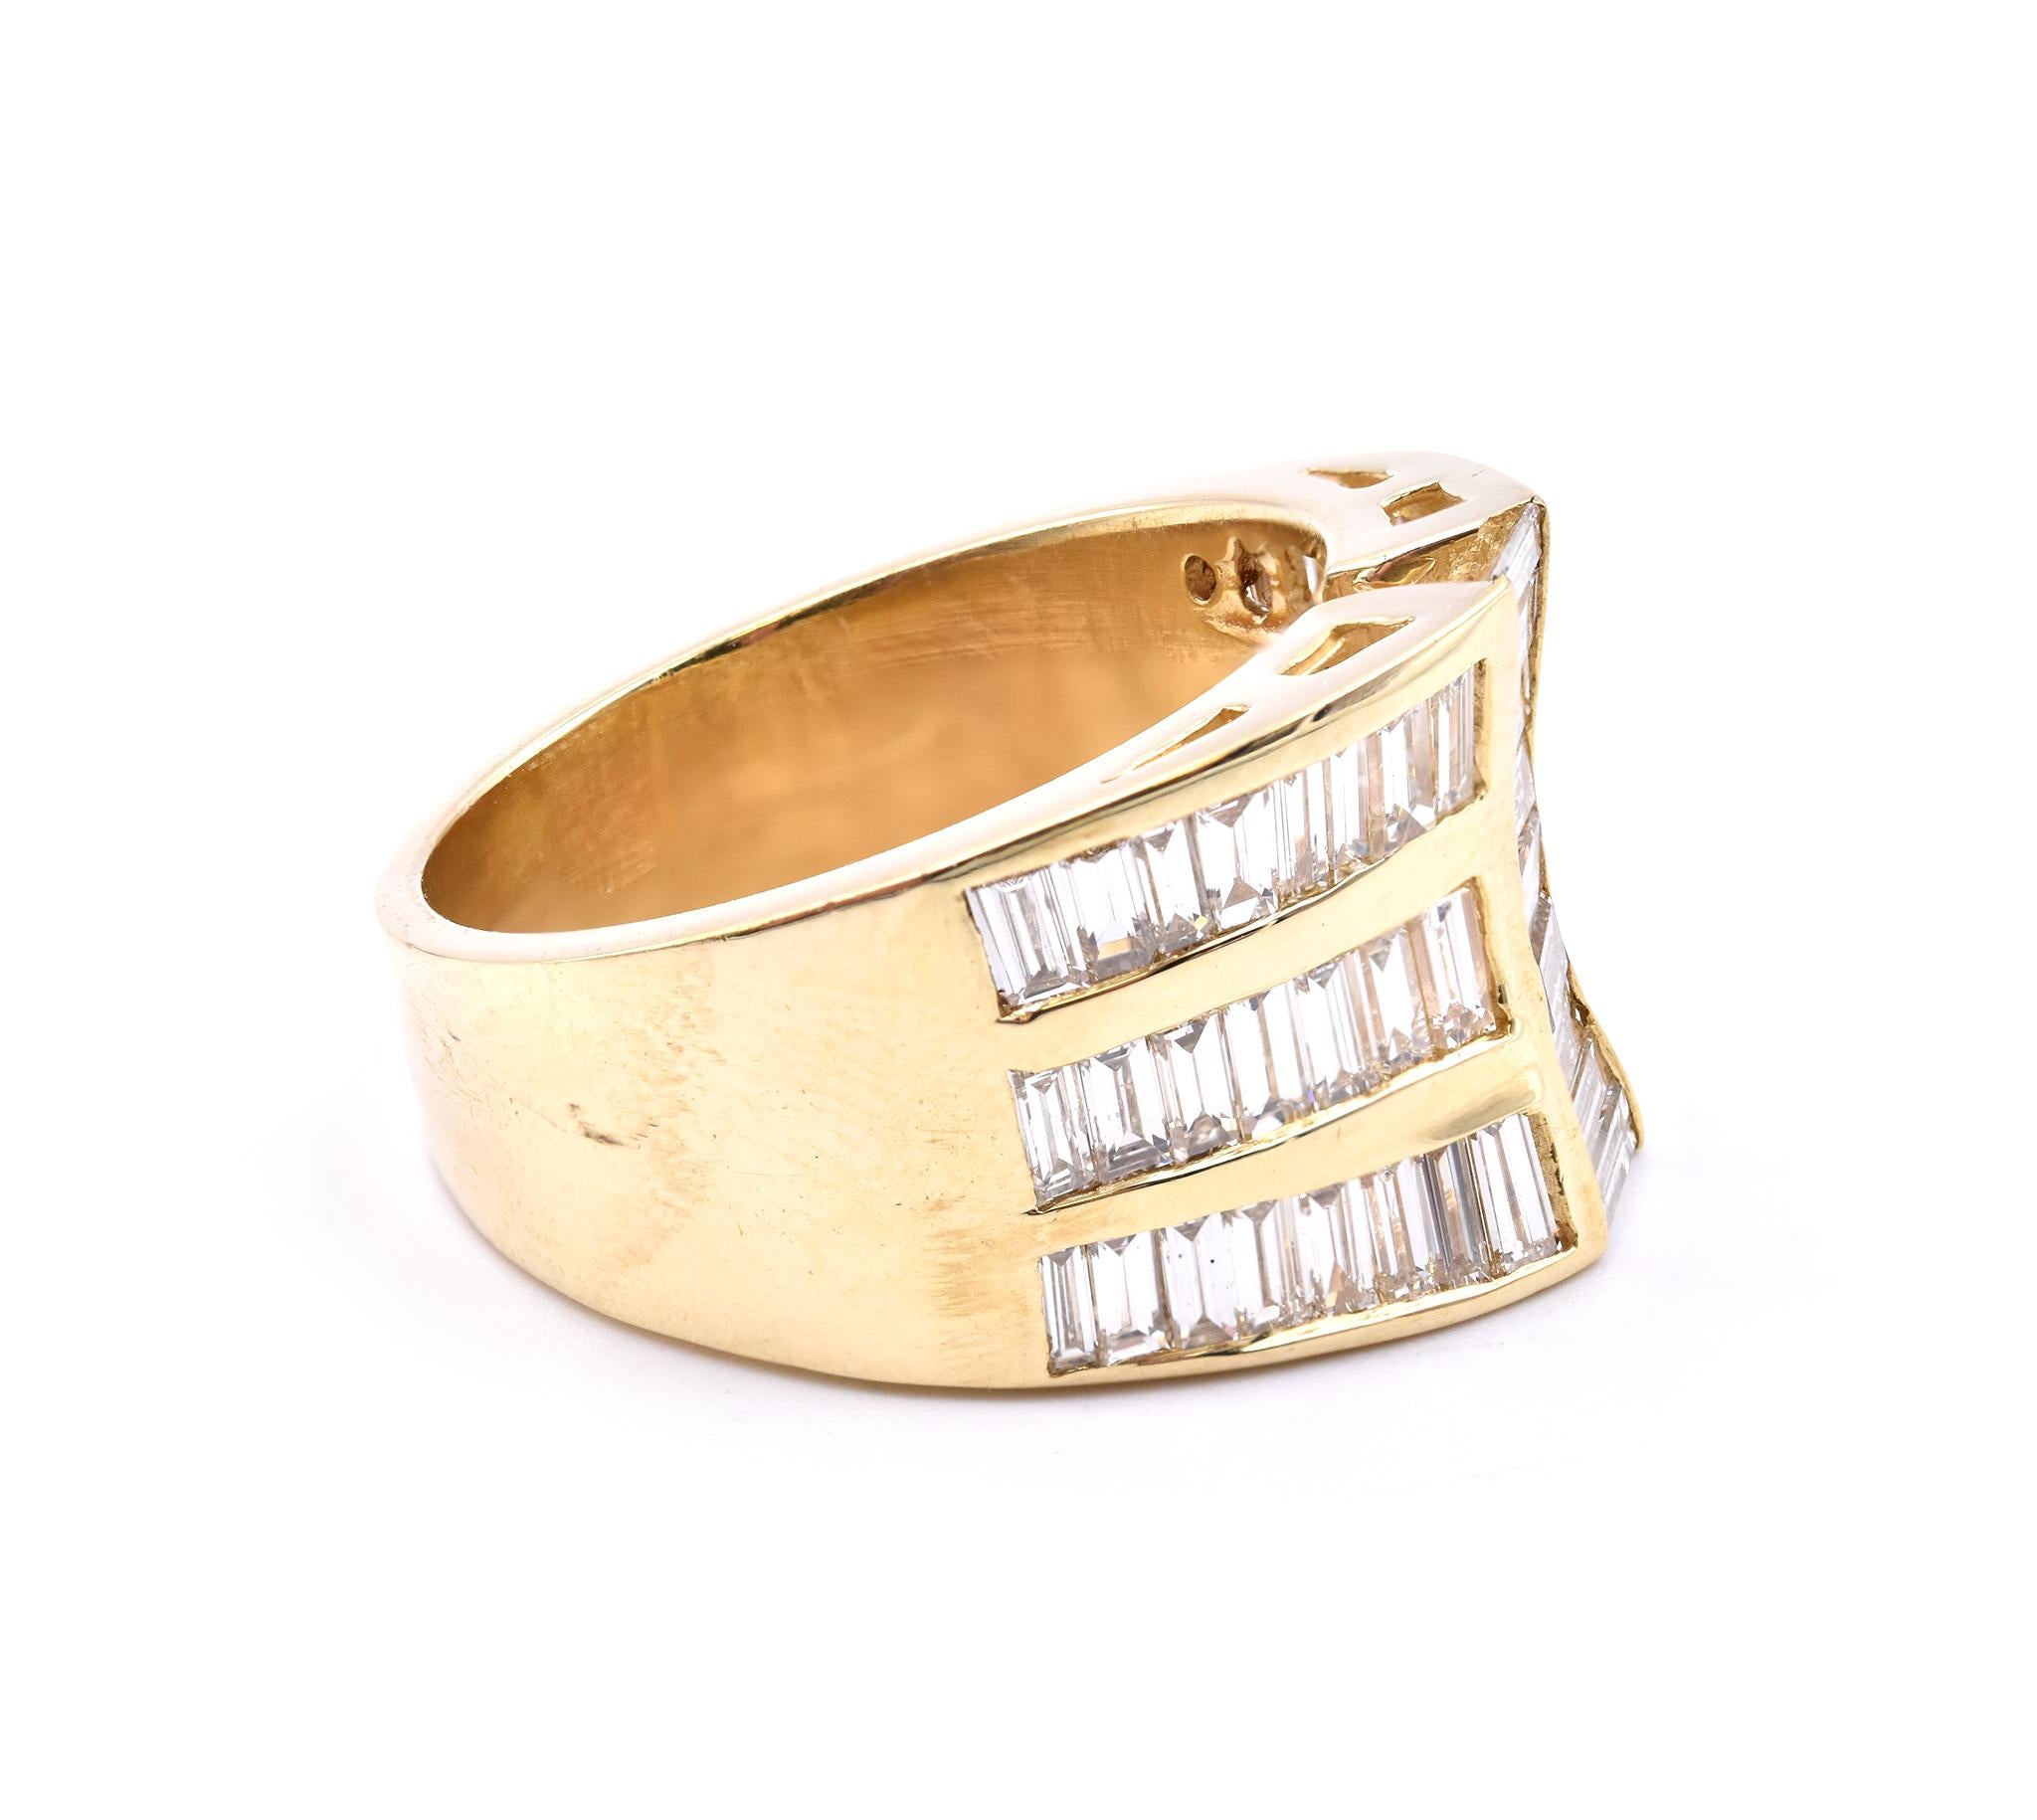 Designer: custom
Material: 18K yellow gold
Diamonds: 51 baguette cut = 2.50cttw
Color: G
Clarity: VS
Ring Size: 10 (Please allow up to two additional business days for sizing requests)
Dimensions: ring top measures 15.17mm wide  
Weight: 16.25 grams